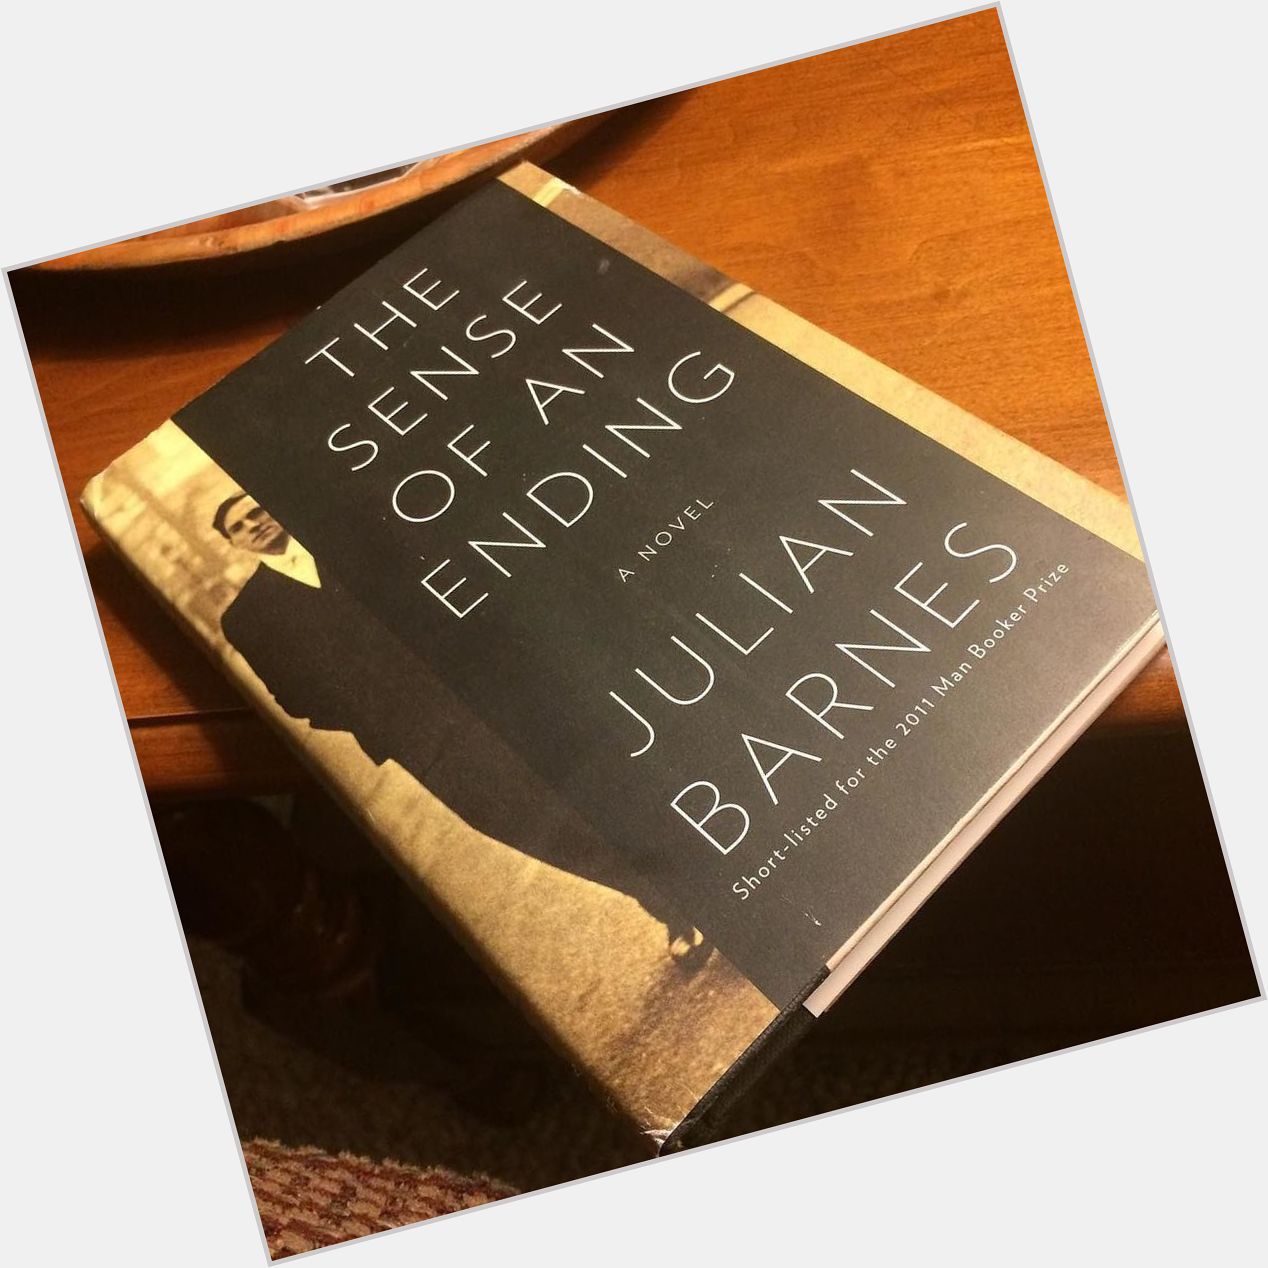 Happy birthday Julian Barnes! The Booker Prize winning author of \"The Sense of an Ending\", 